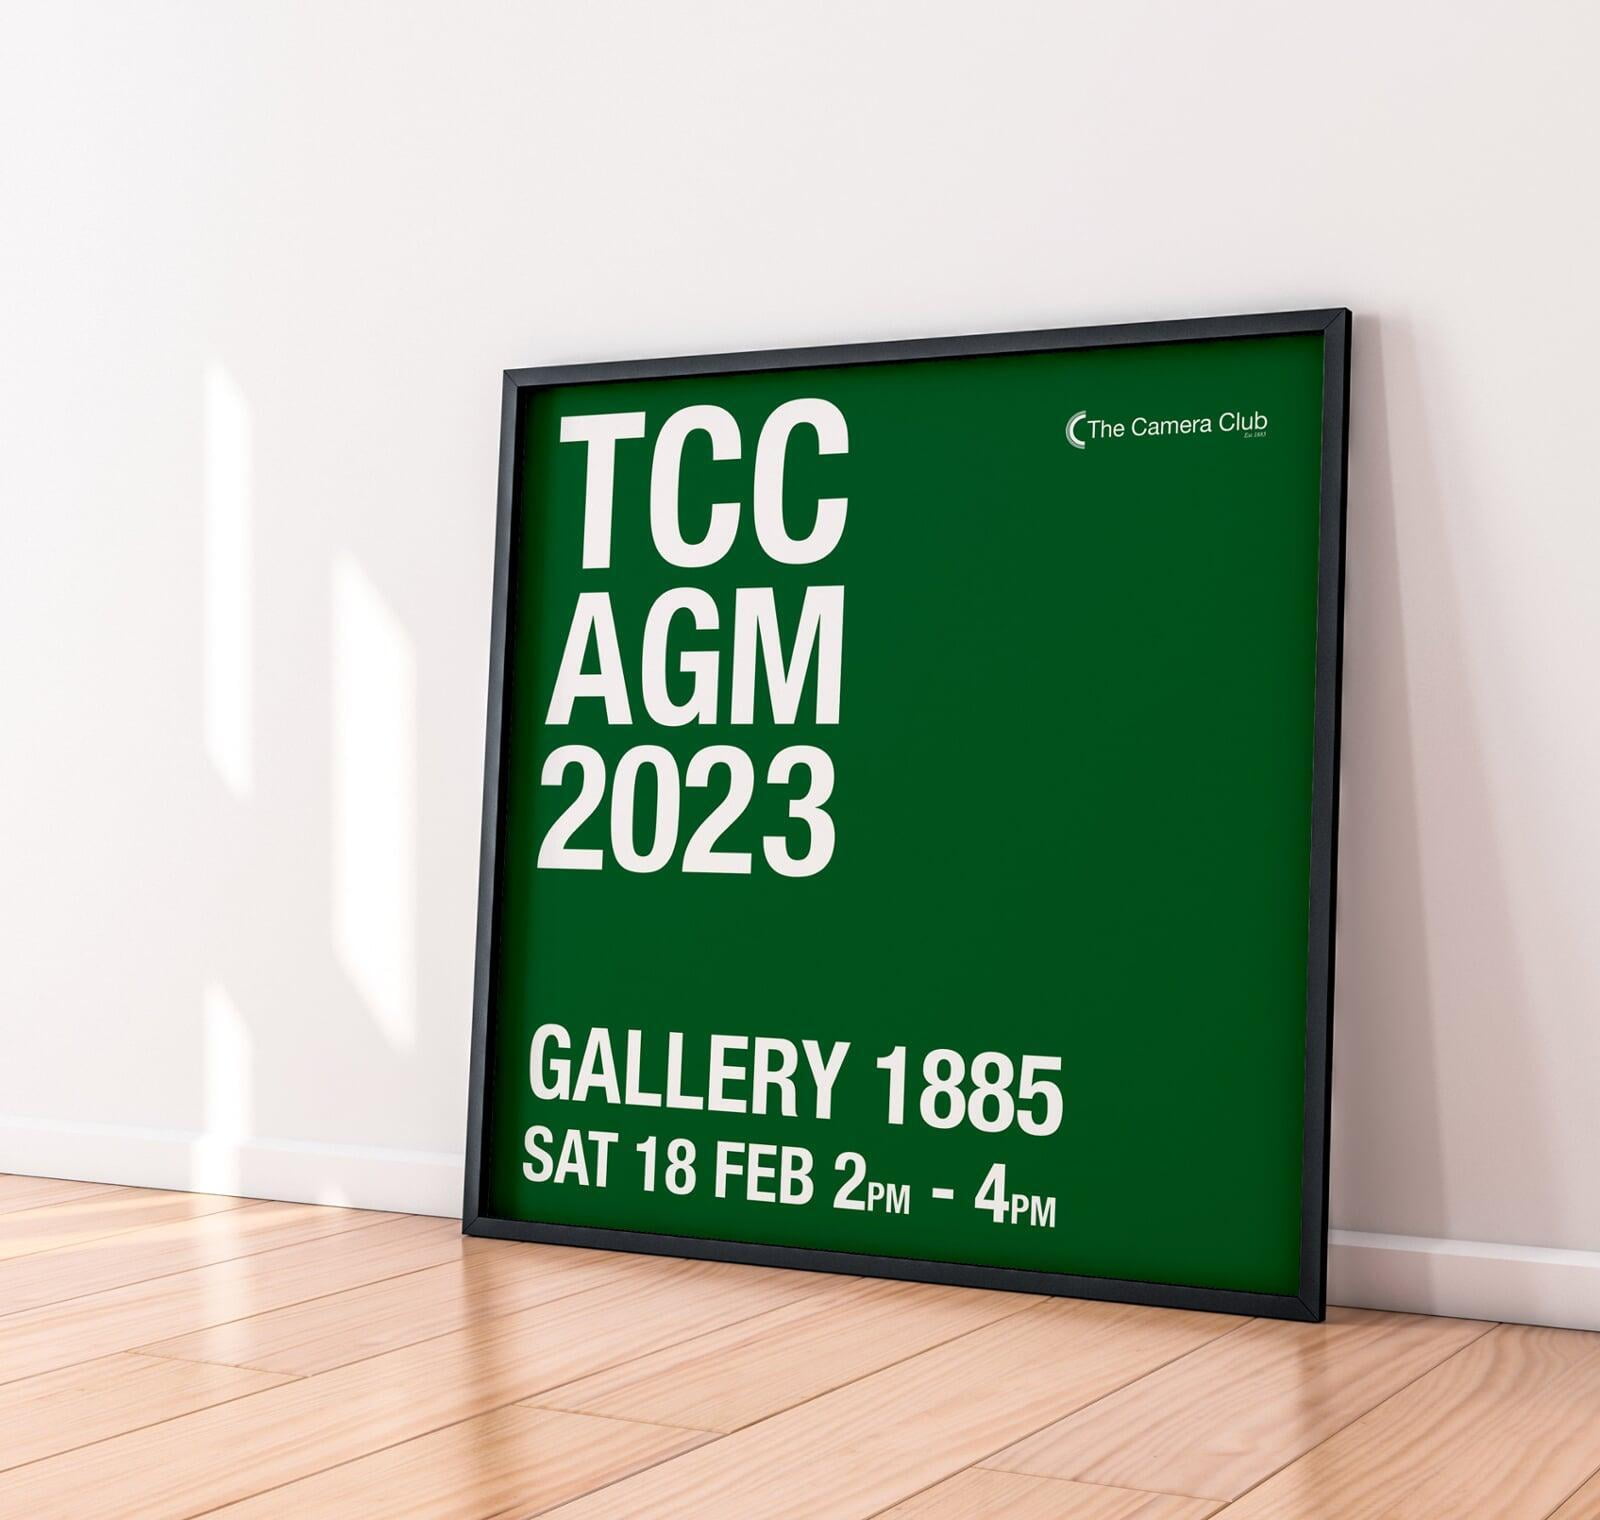 The Camera Club 2023 Annual General Meeting